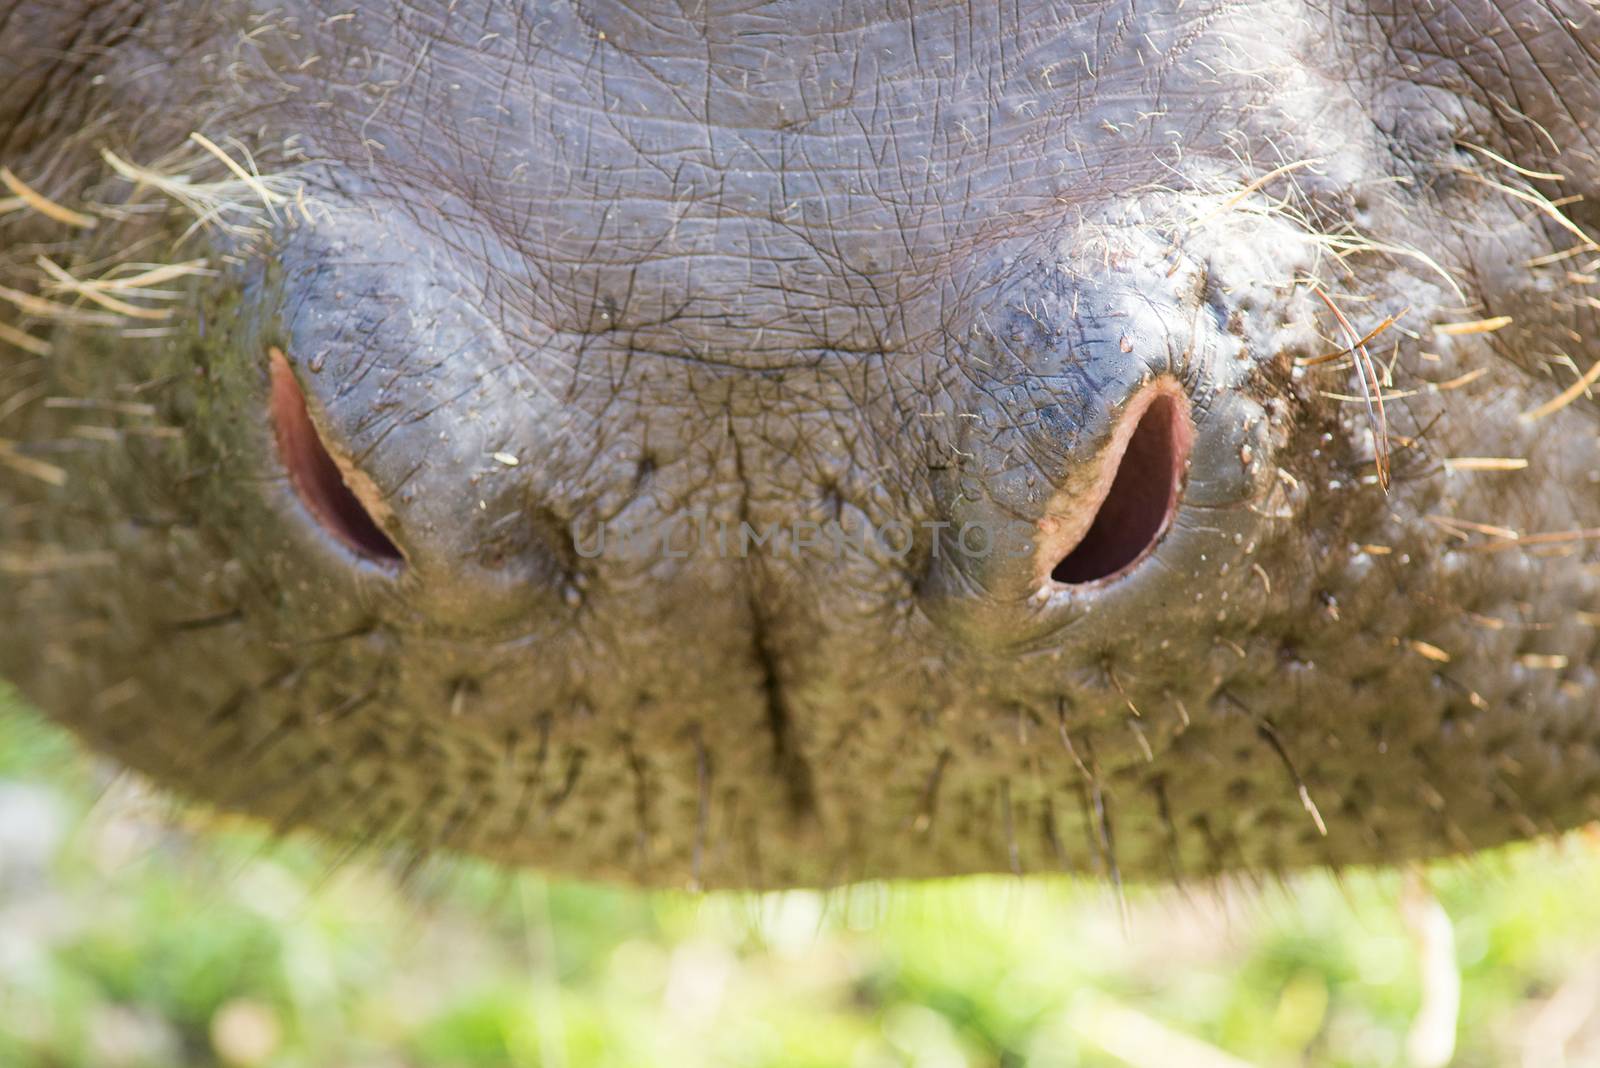 Nose of a hippo by Arrxxx